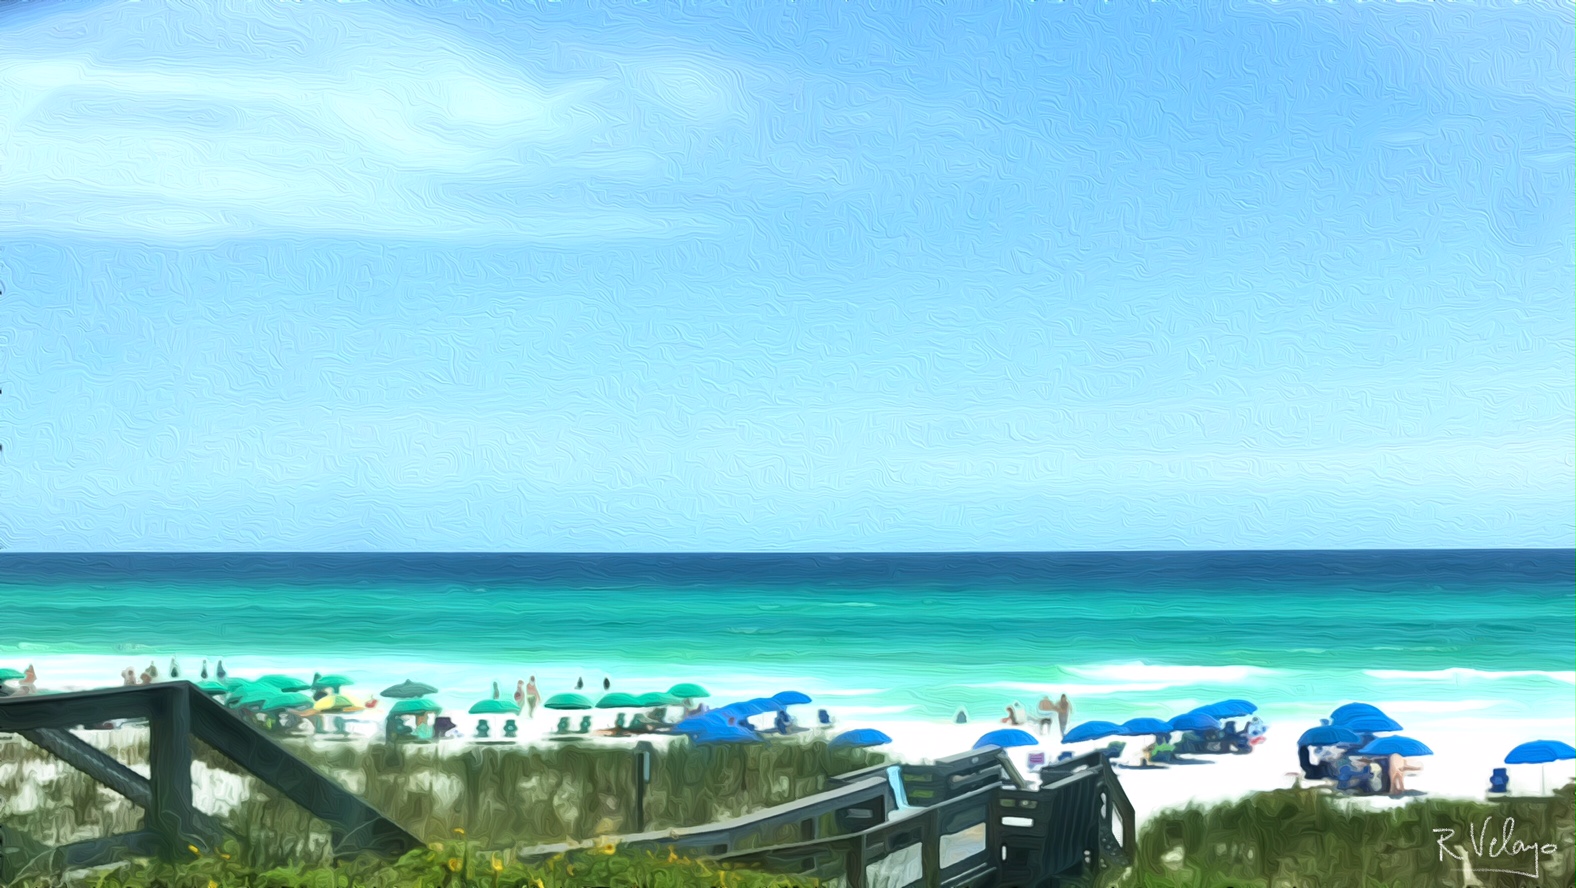 "DRIVING BY PENSACOLA BEACH IN MAY" [Created: 6/23/2021]